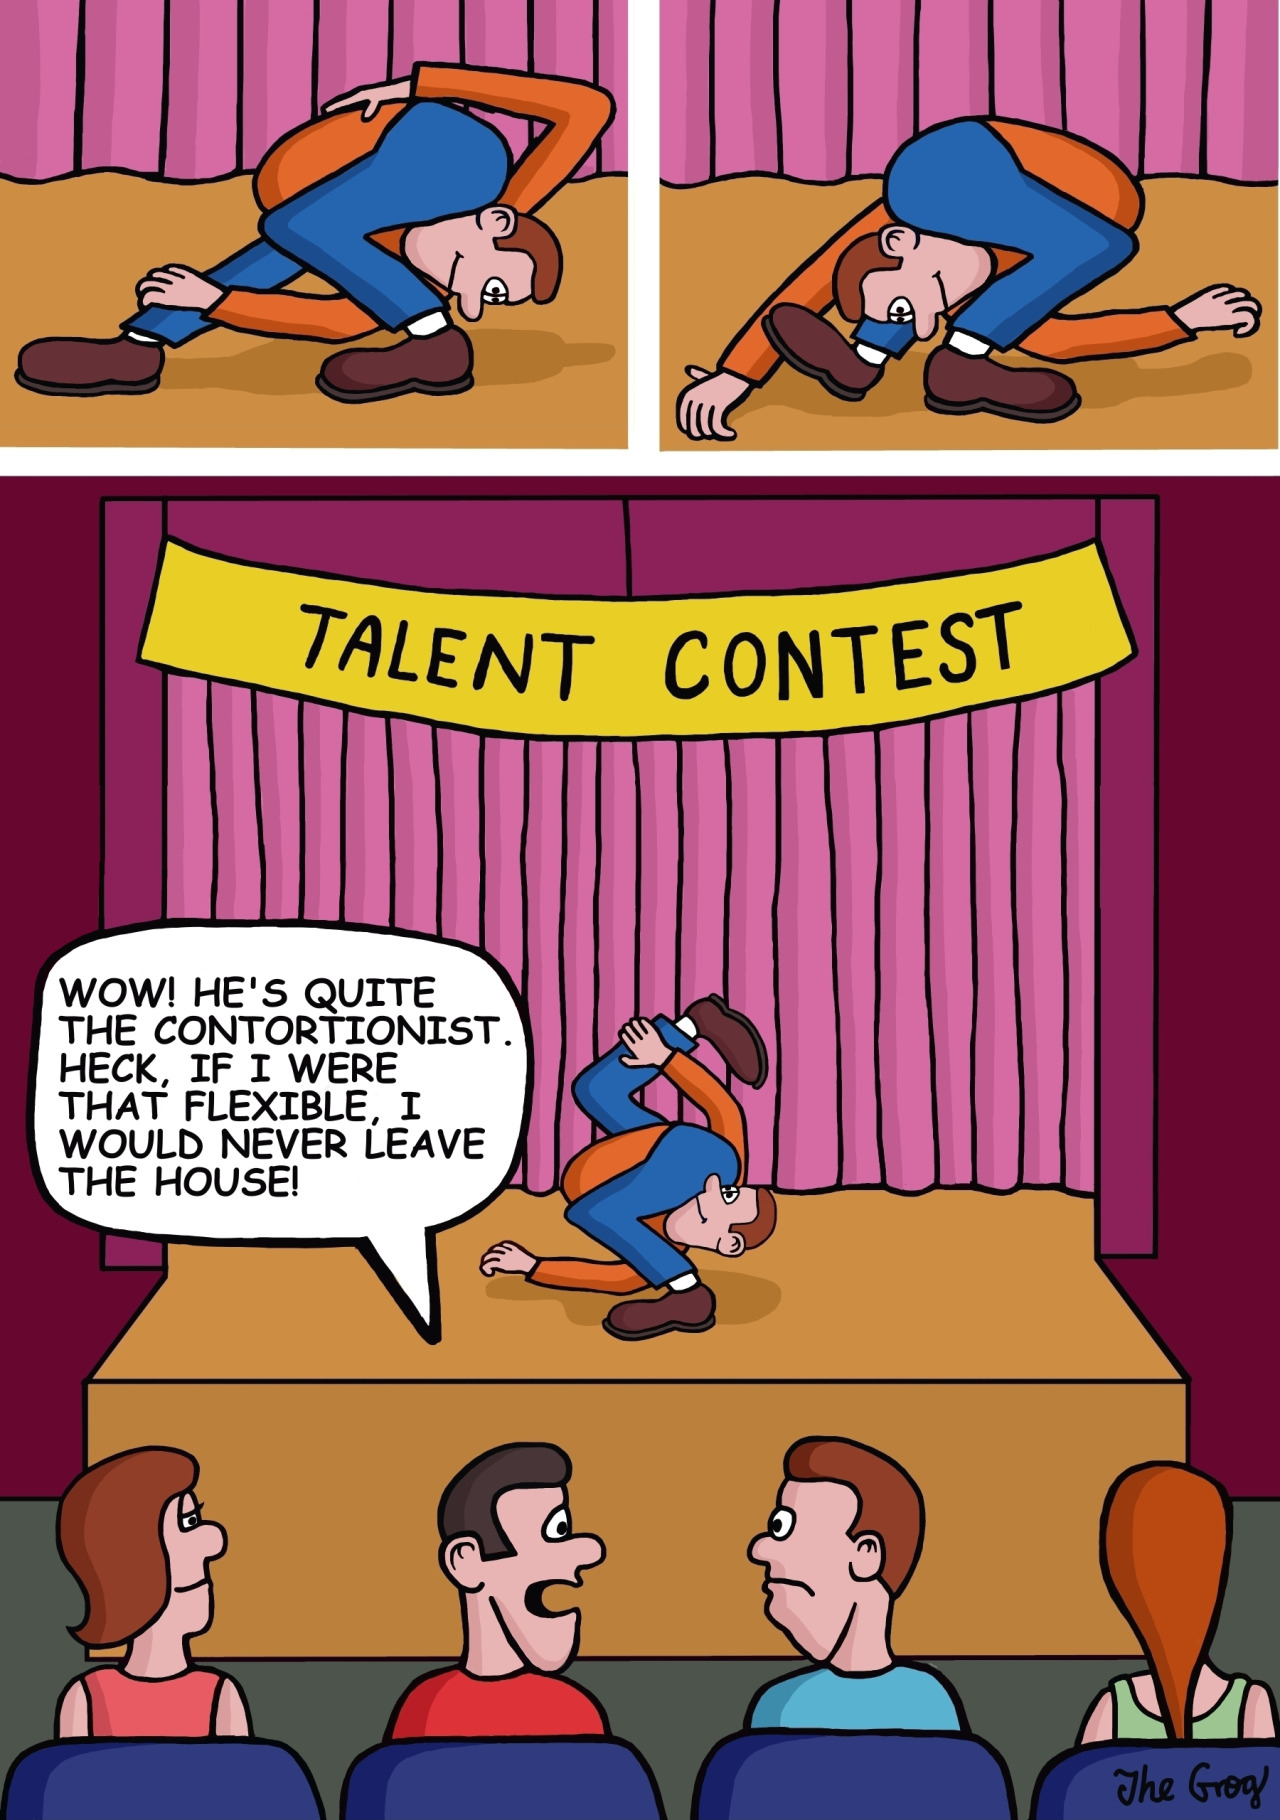 A man goes to a talent show. The first contestant is a contortionist. The man says to the person next to him, “Wow! The guy on stage is quite the contortionist. Heck, if I were that flexible, I would never leave the house!”